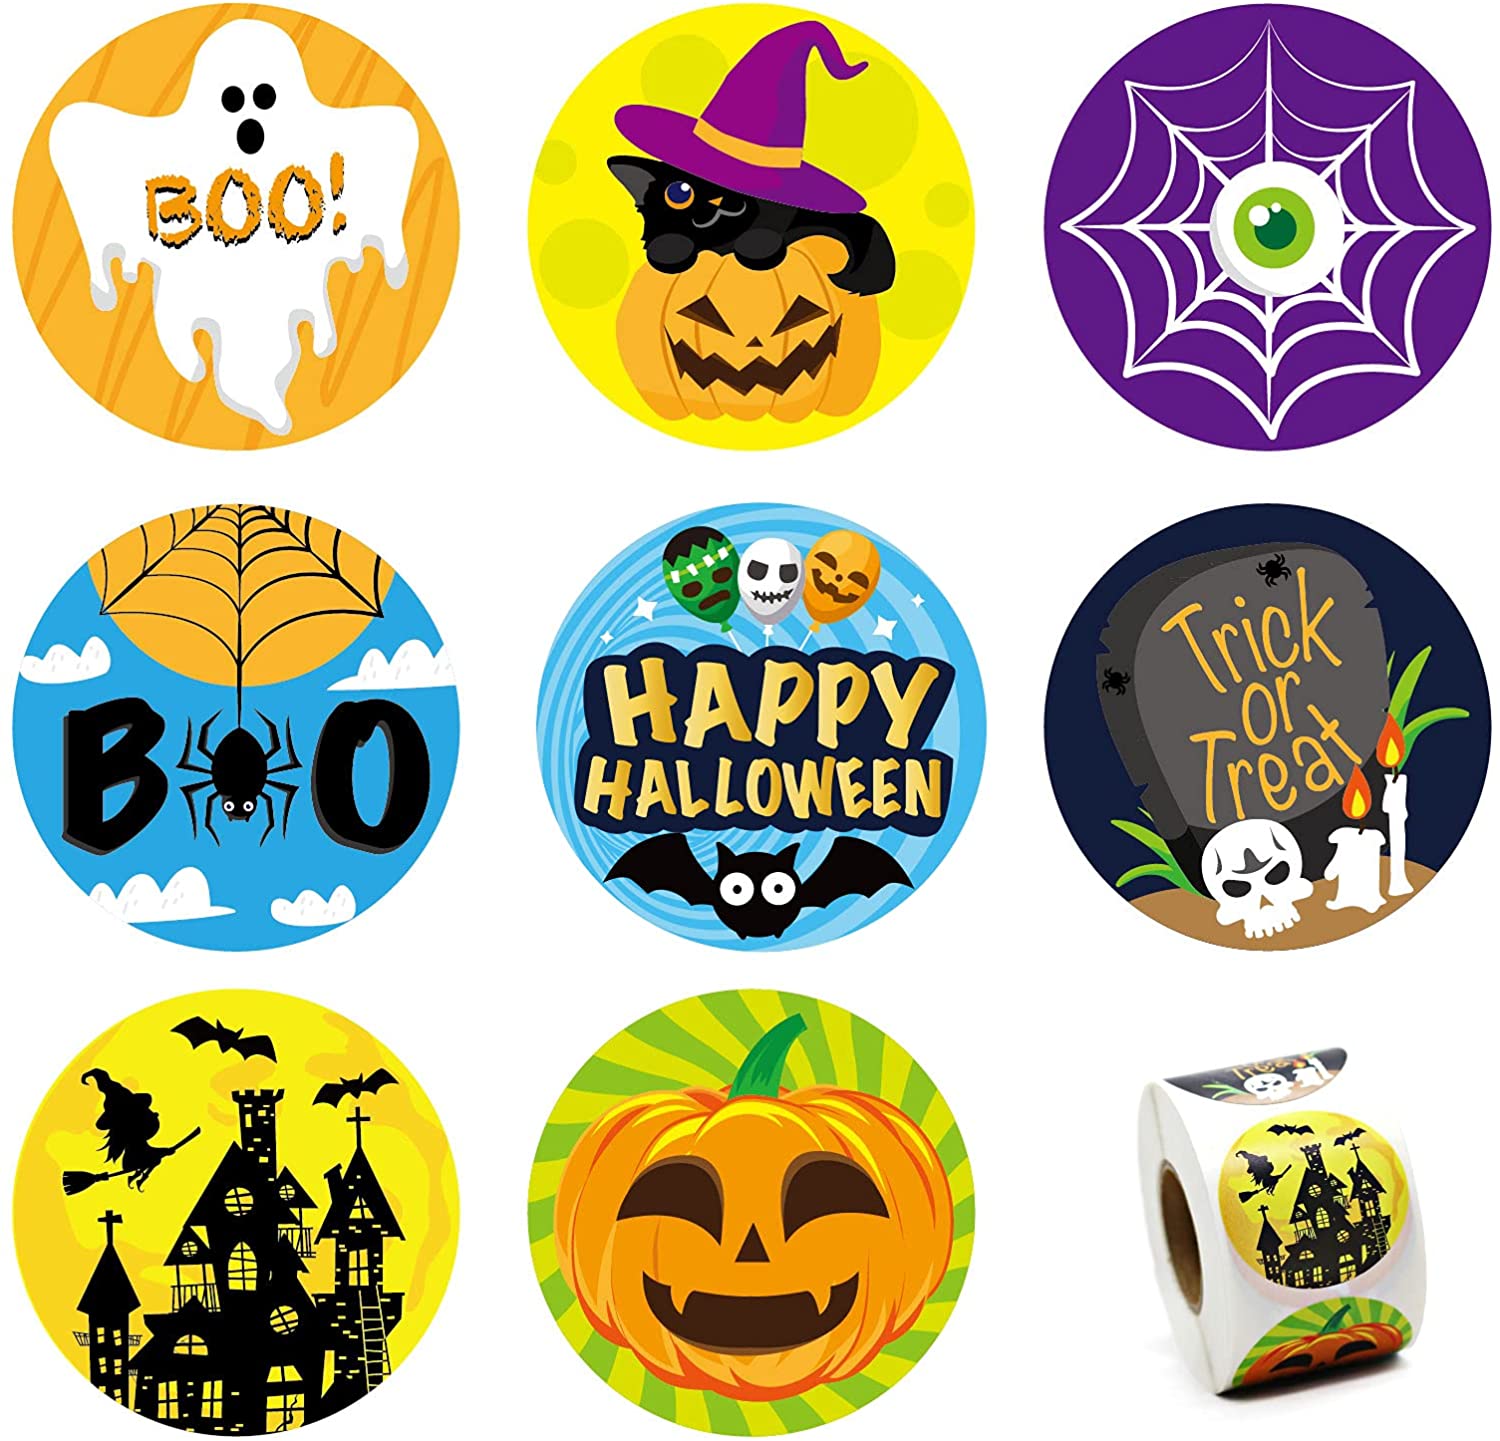 Halloween Stickers for Kids 500 Pcs Party Roll Round Character Sticker Trick or Treat 